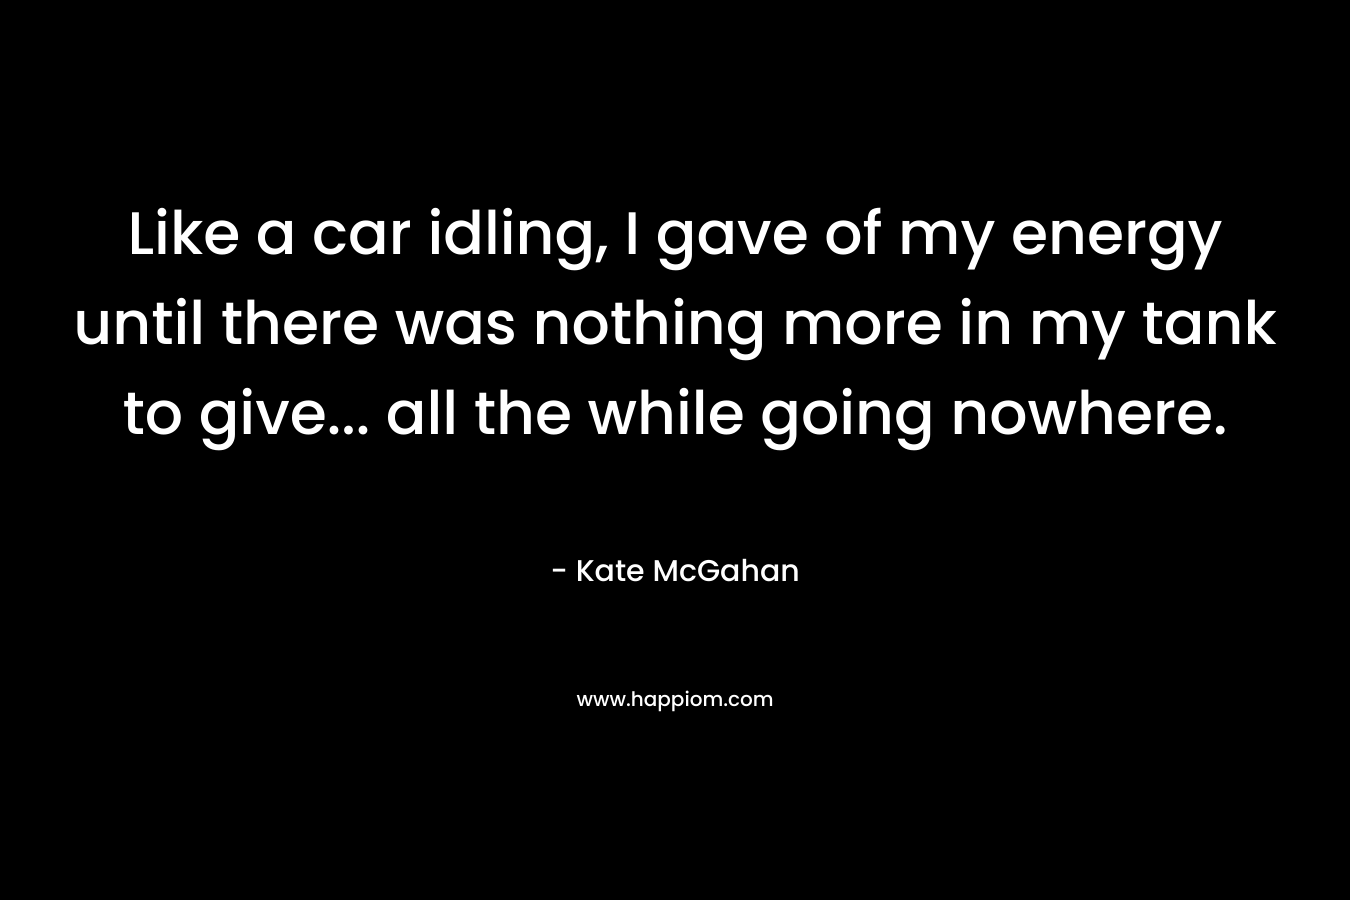 Like a car idling, I gave of my energy until there was nothing more in my tank to give… all the while going nowhere. – Kate McGahan